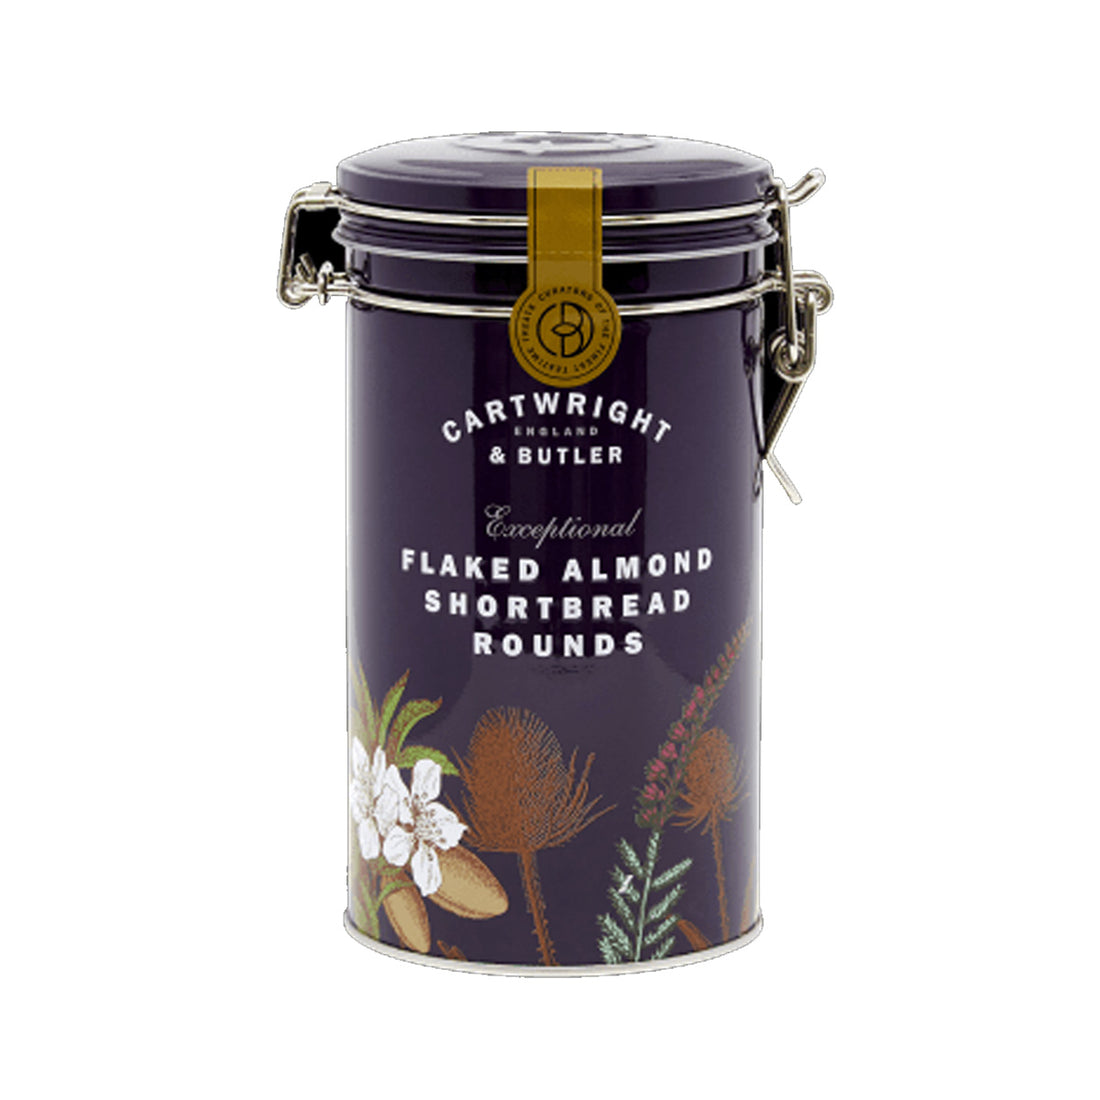 Cartwright & Butler Flaked Almond Shortbread Rounds Tin 200g